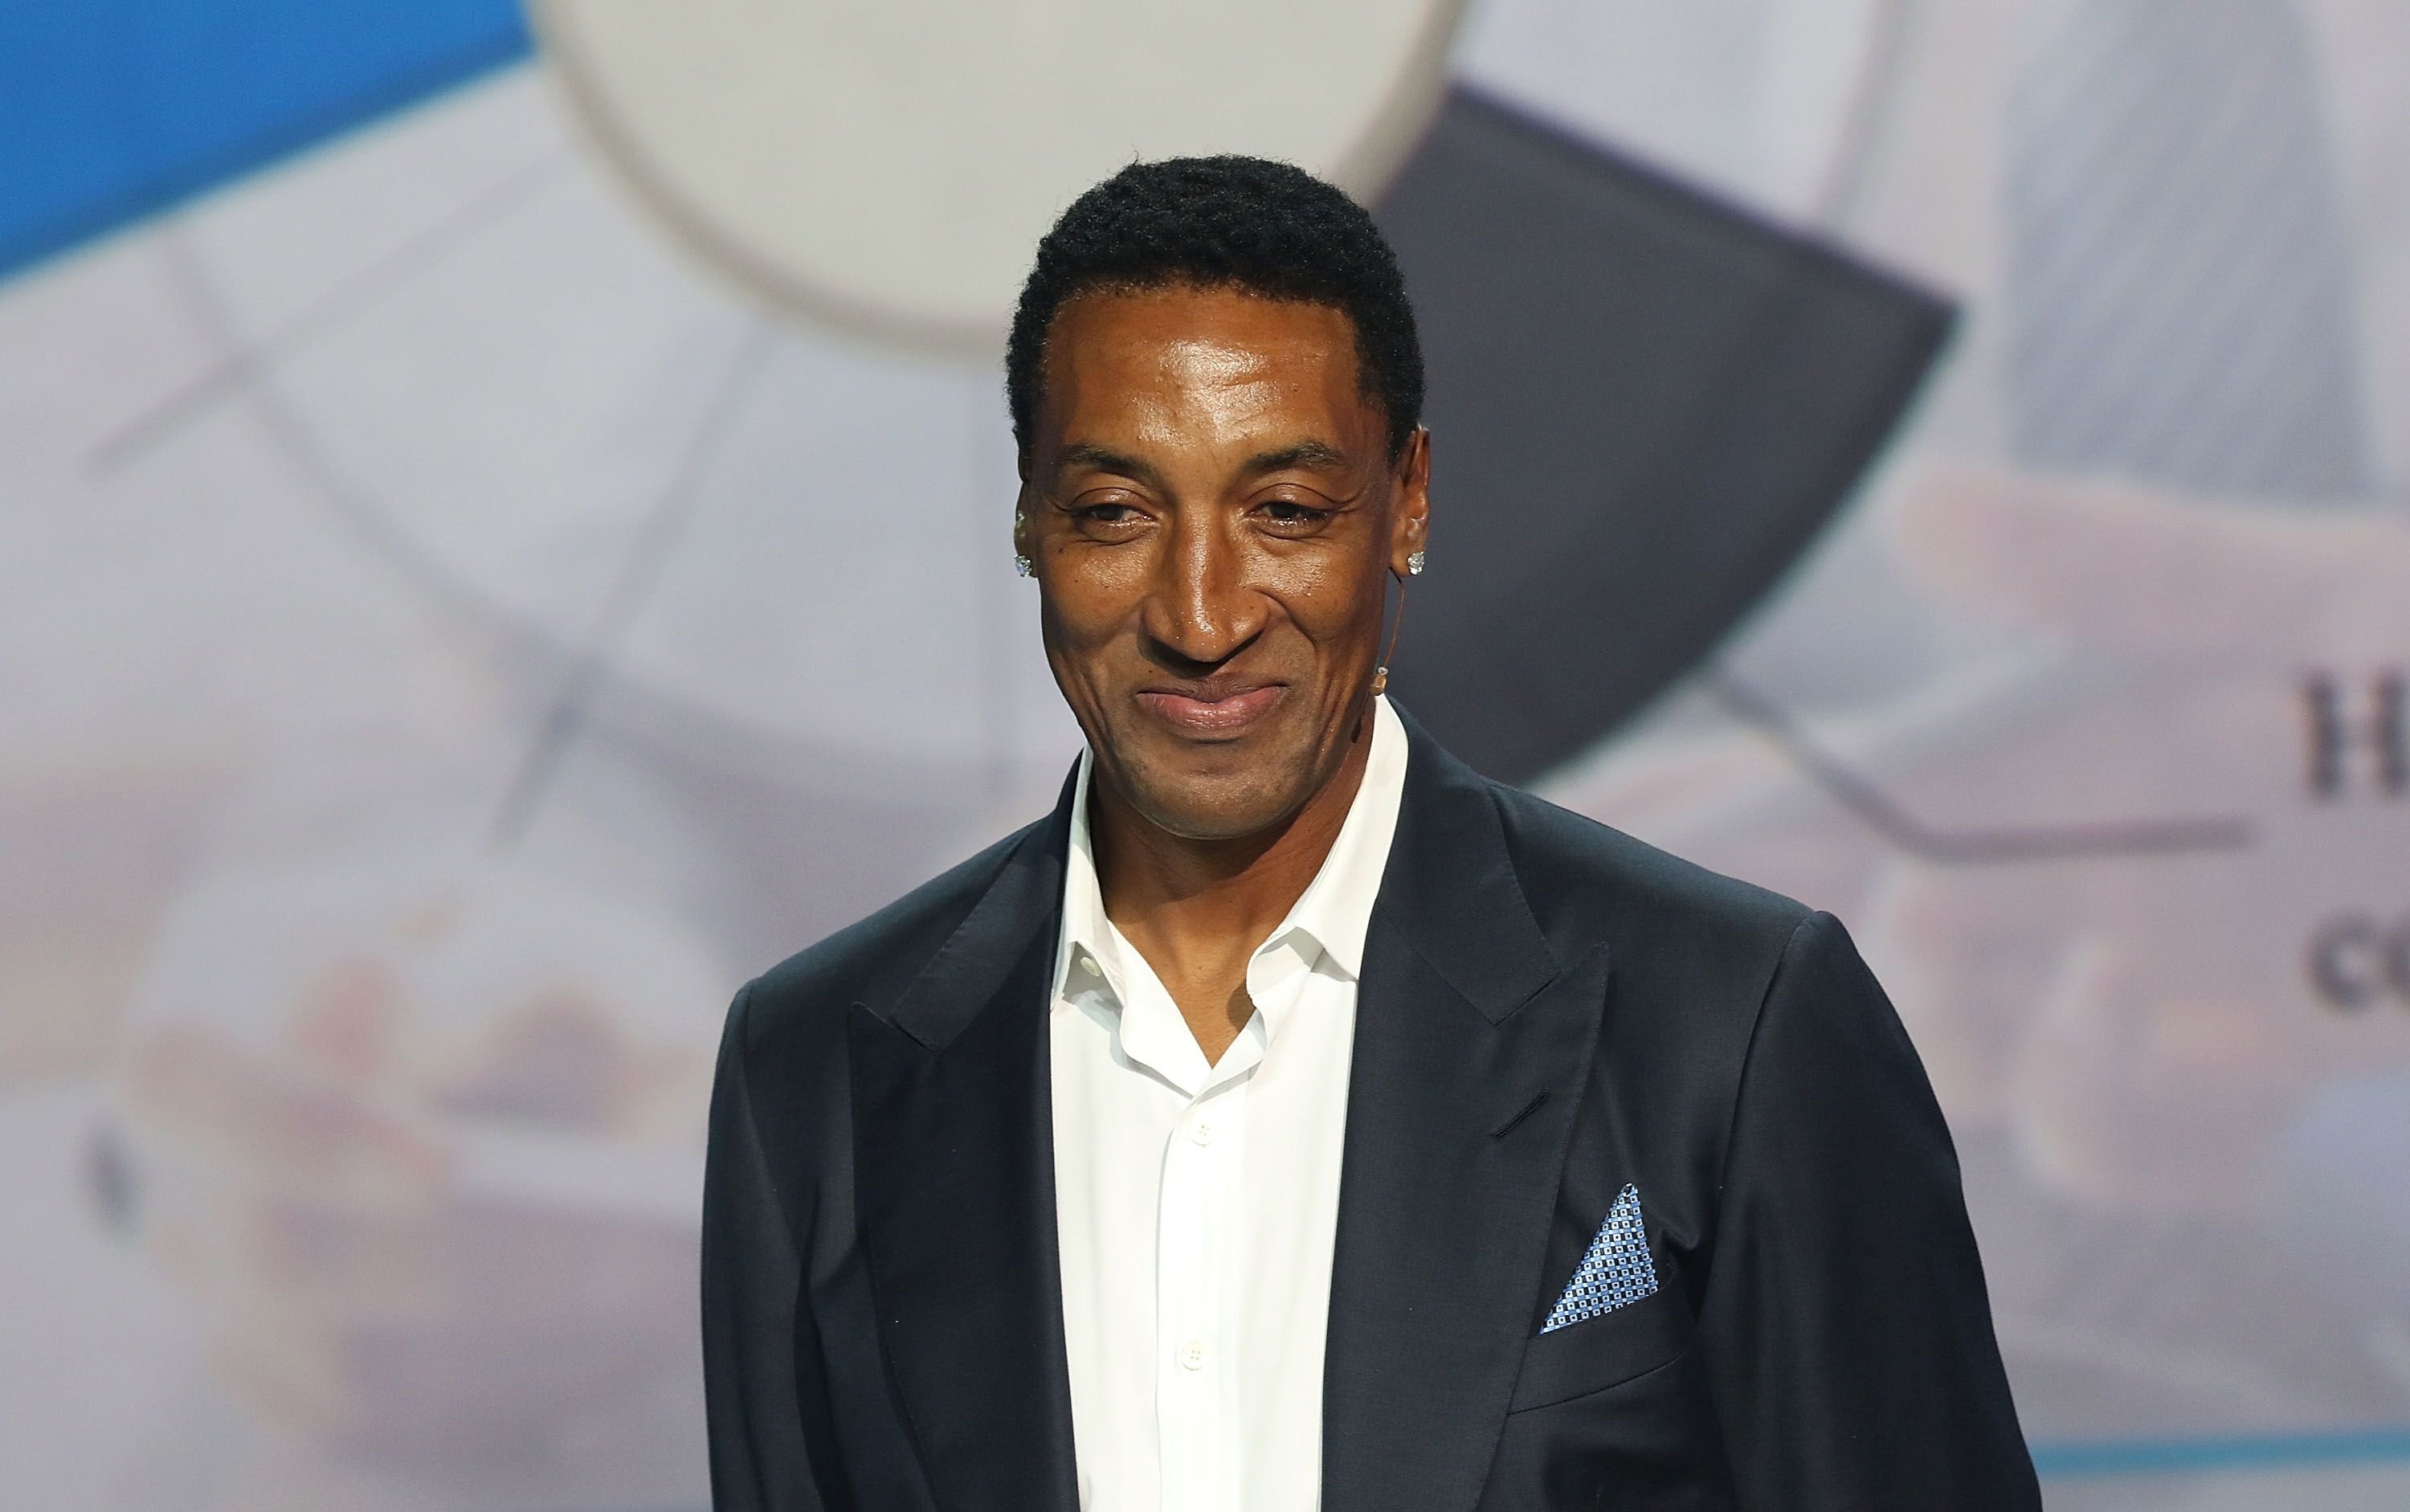 Scottie Pippen attends Market America Conference 2016 at American Airlines Arena on February 4, 2016 in Miami, Florida. | Source: Getty Images